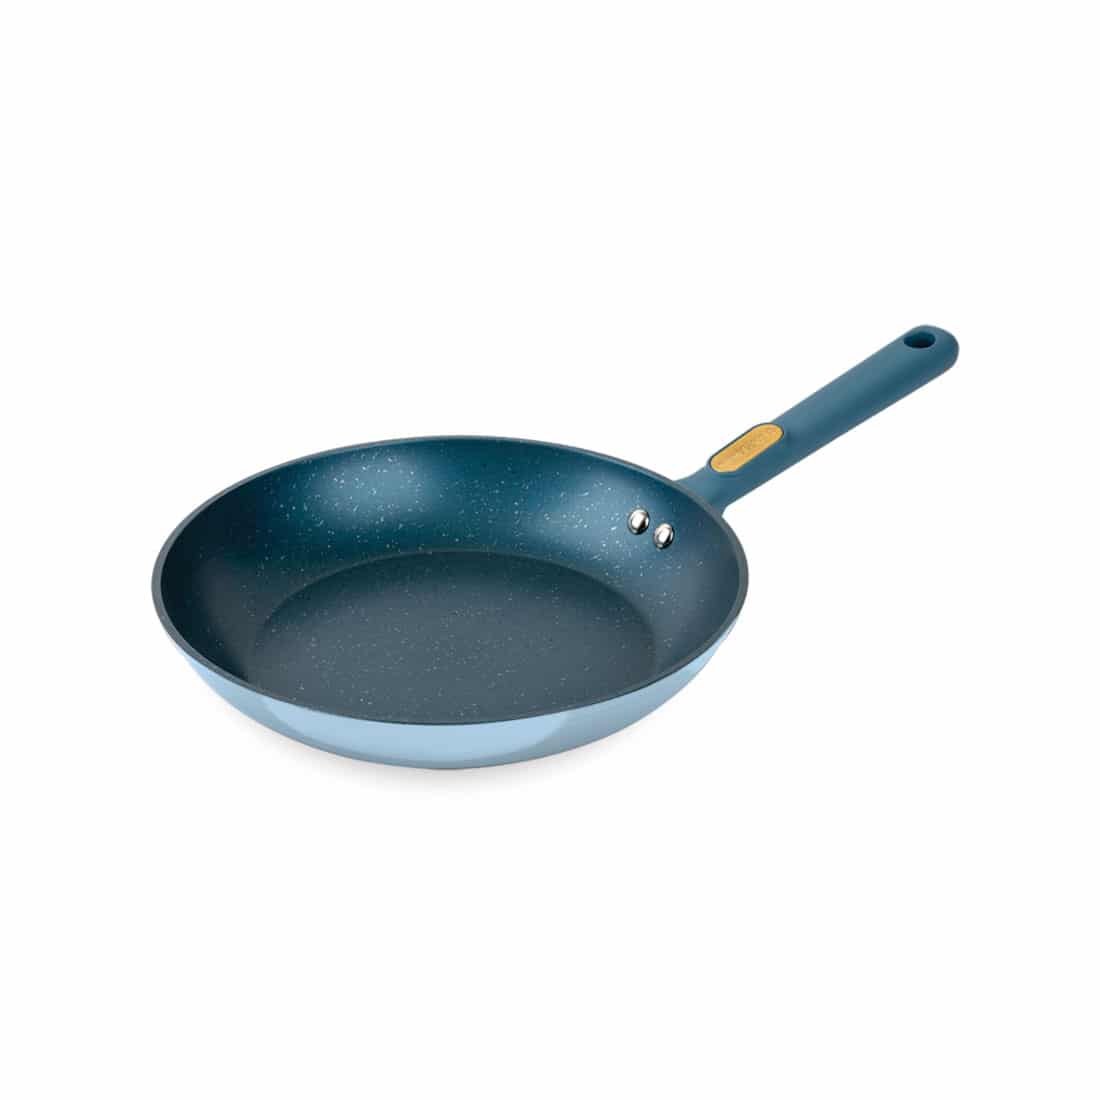 Thyme & Table Non-Stick 10 Inch Fry Pan with Stainless Steel Base, Blue 